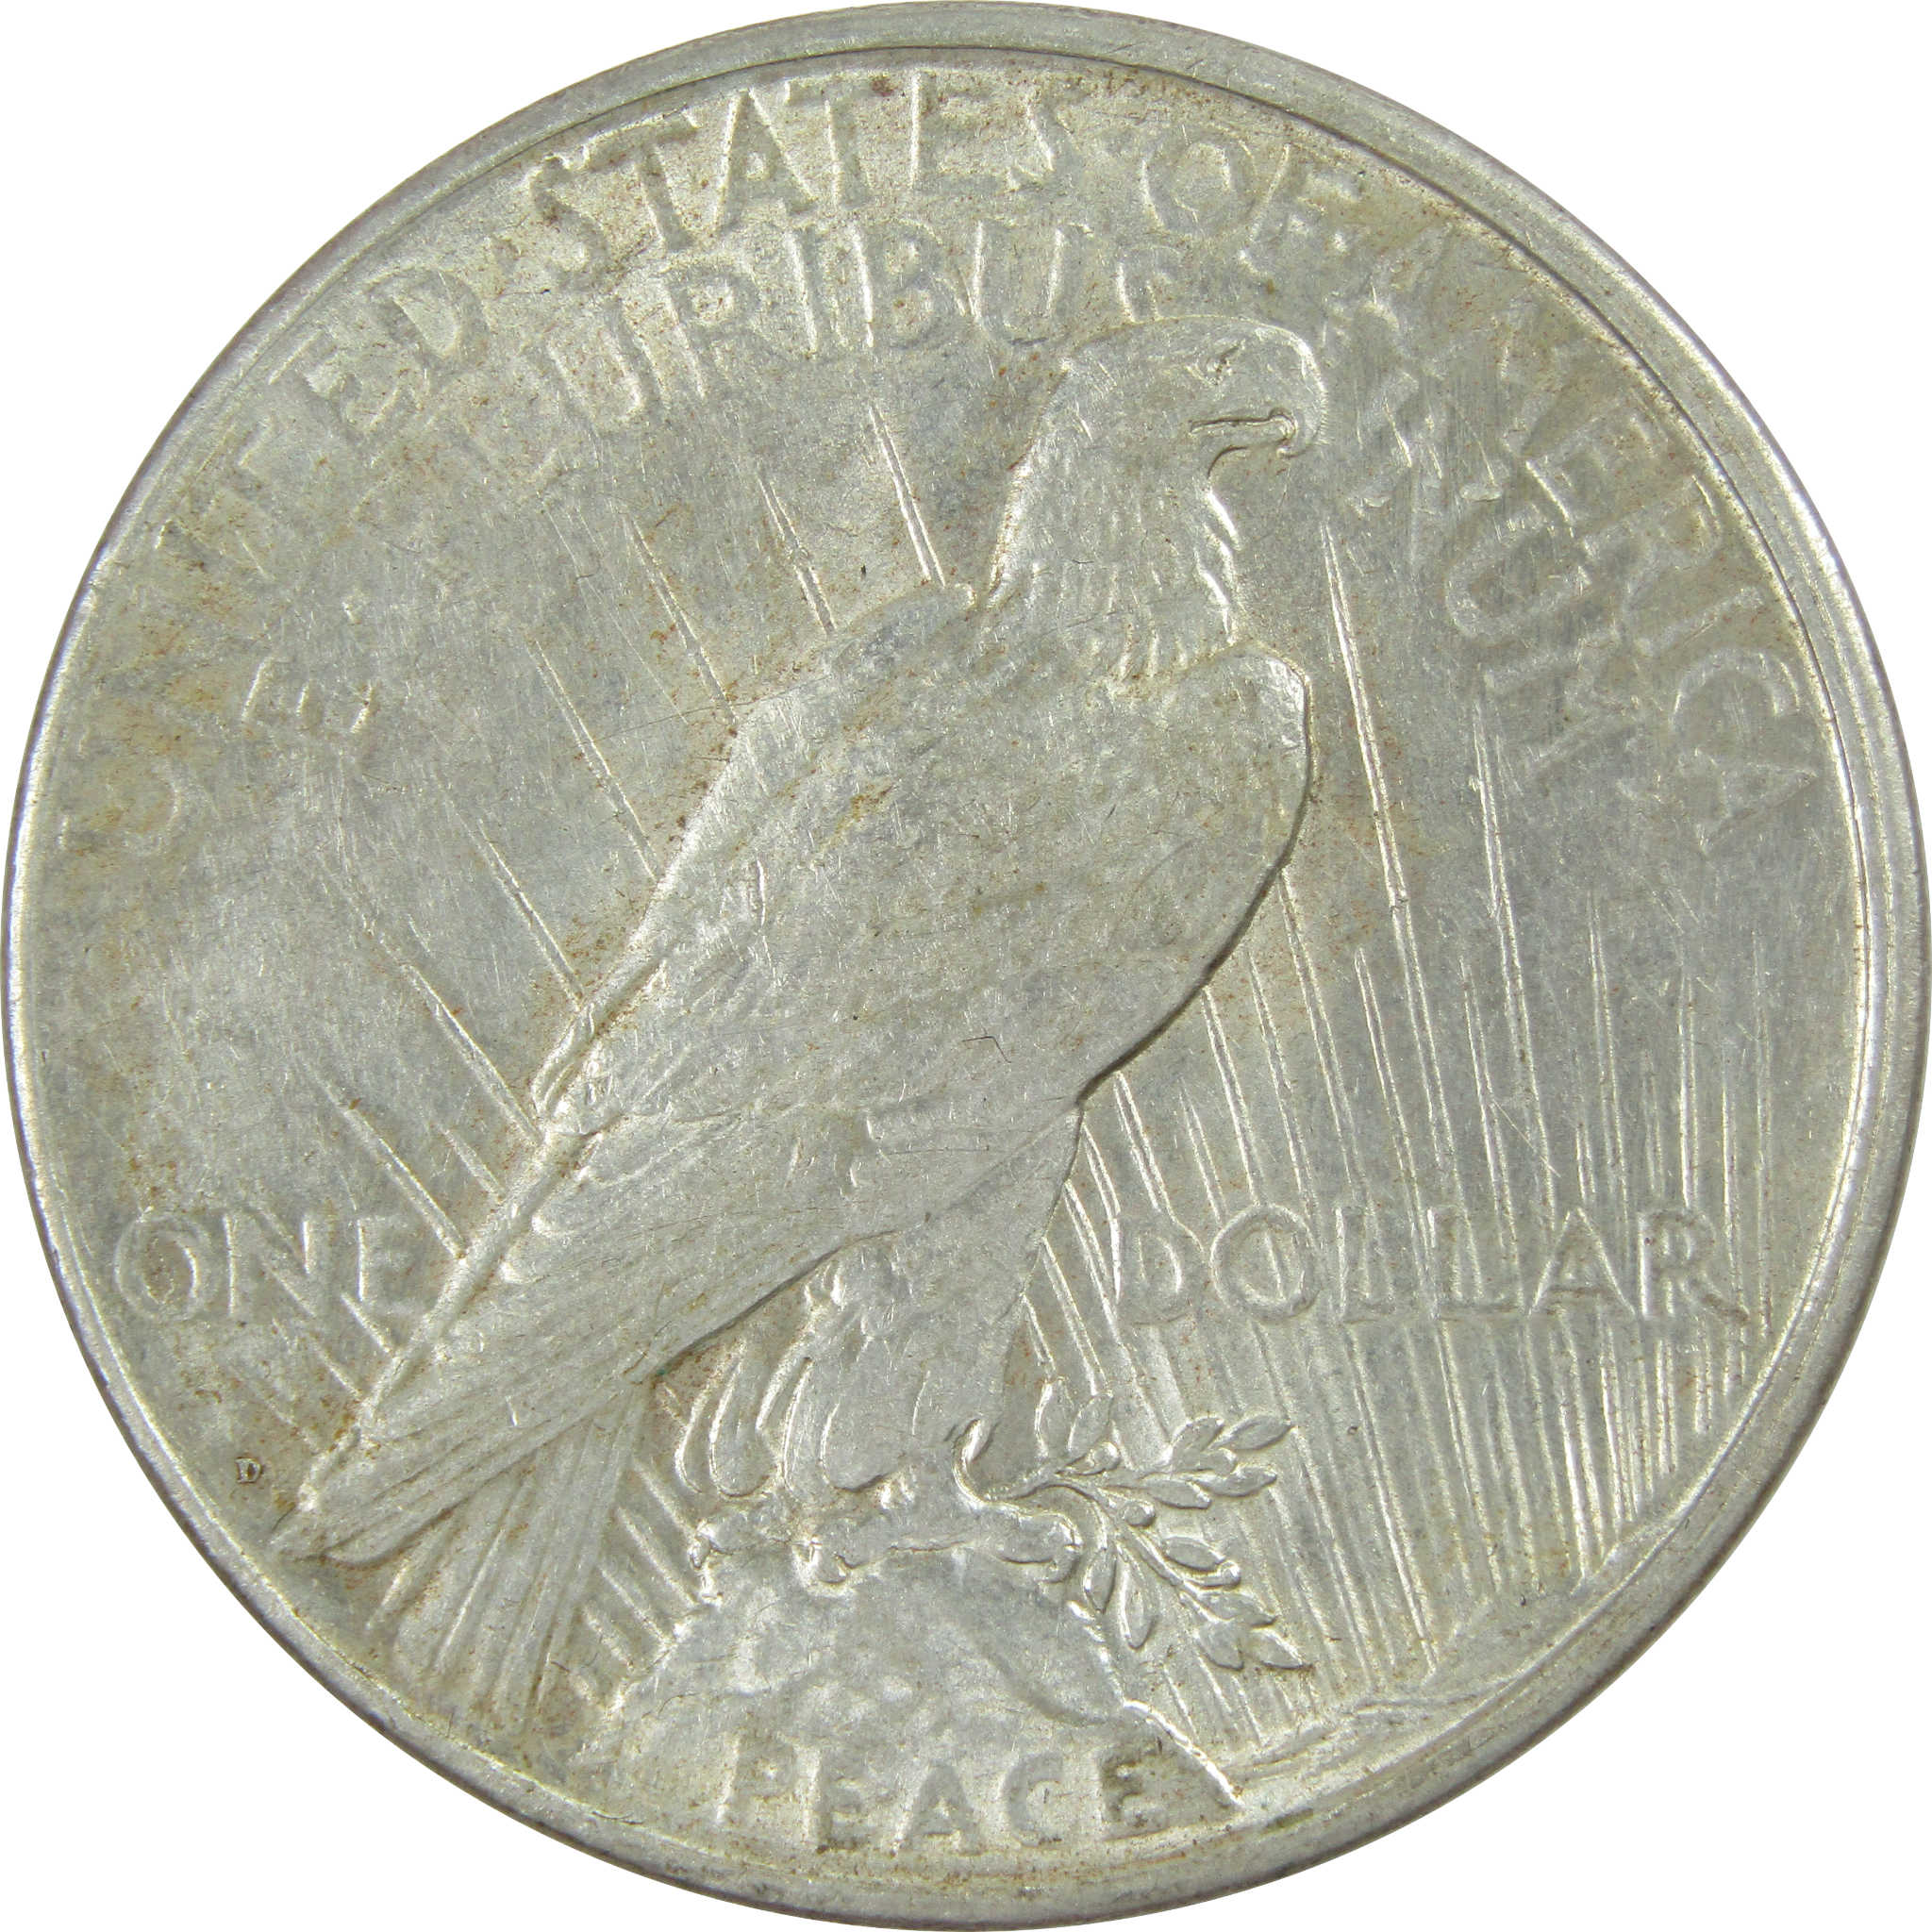 1926 D Peace Dollar AU About Uncirculated Silver $1 Coin SKU:I13686